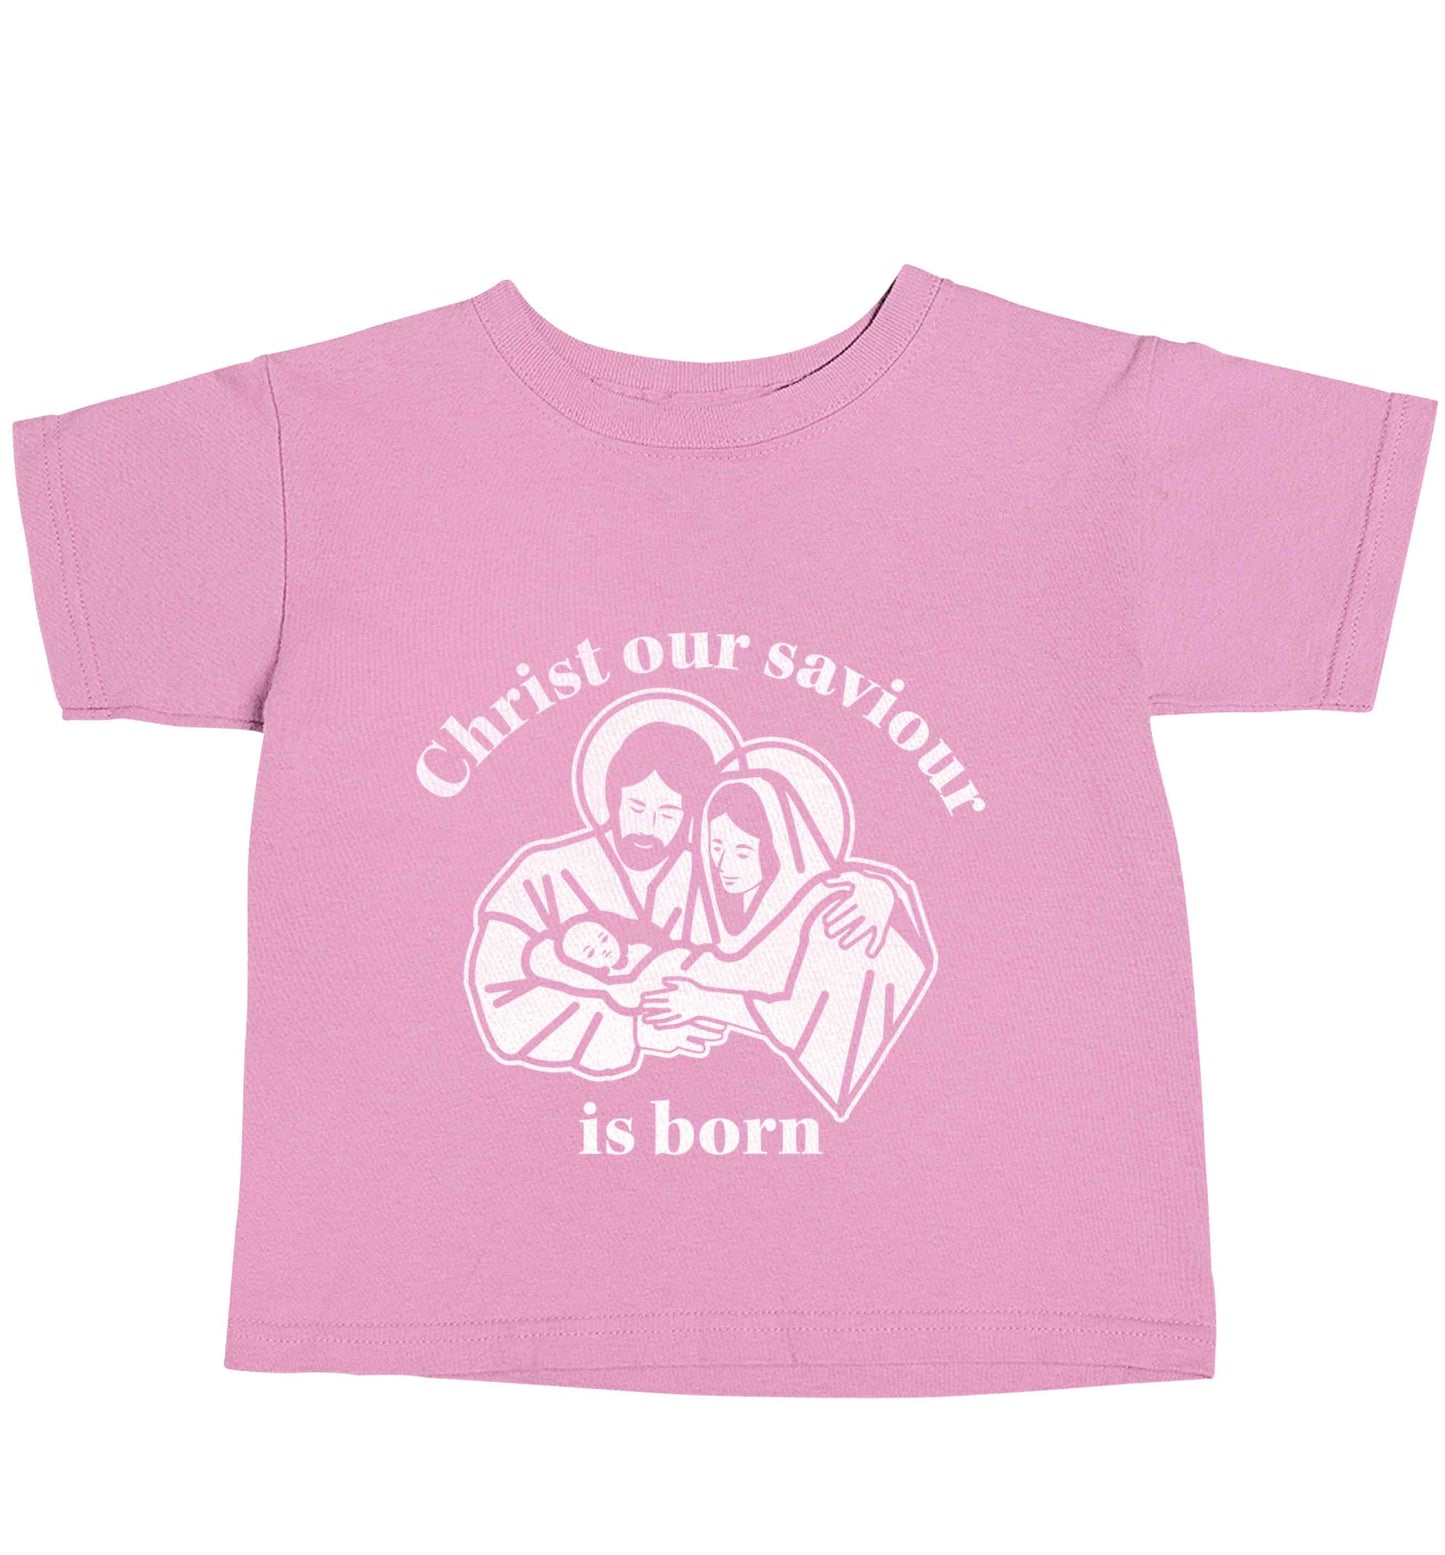 Christ our saviour is born light pink baby toddler Tshirt 2 Years